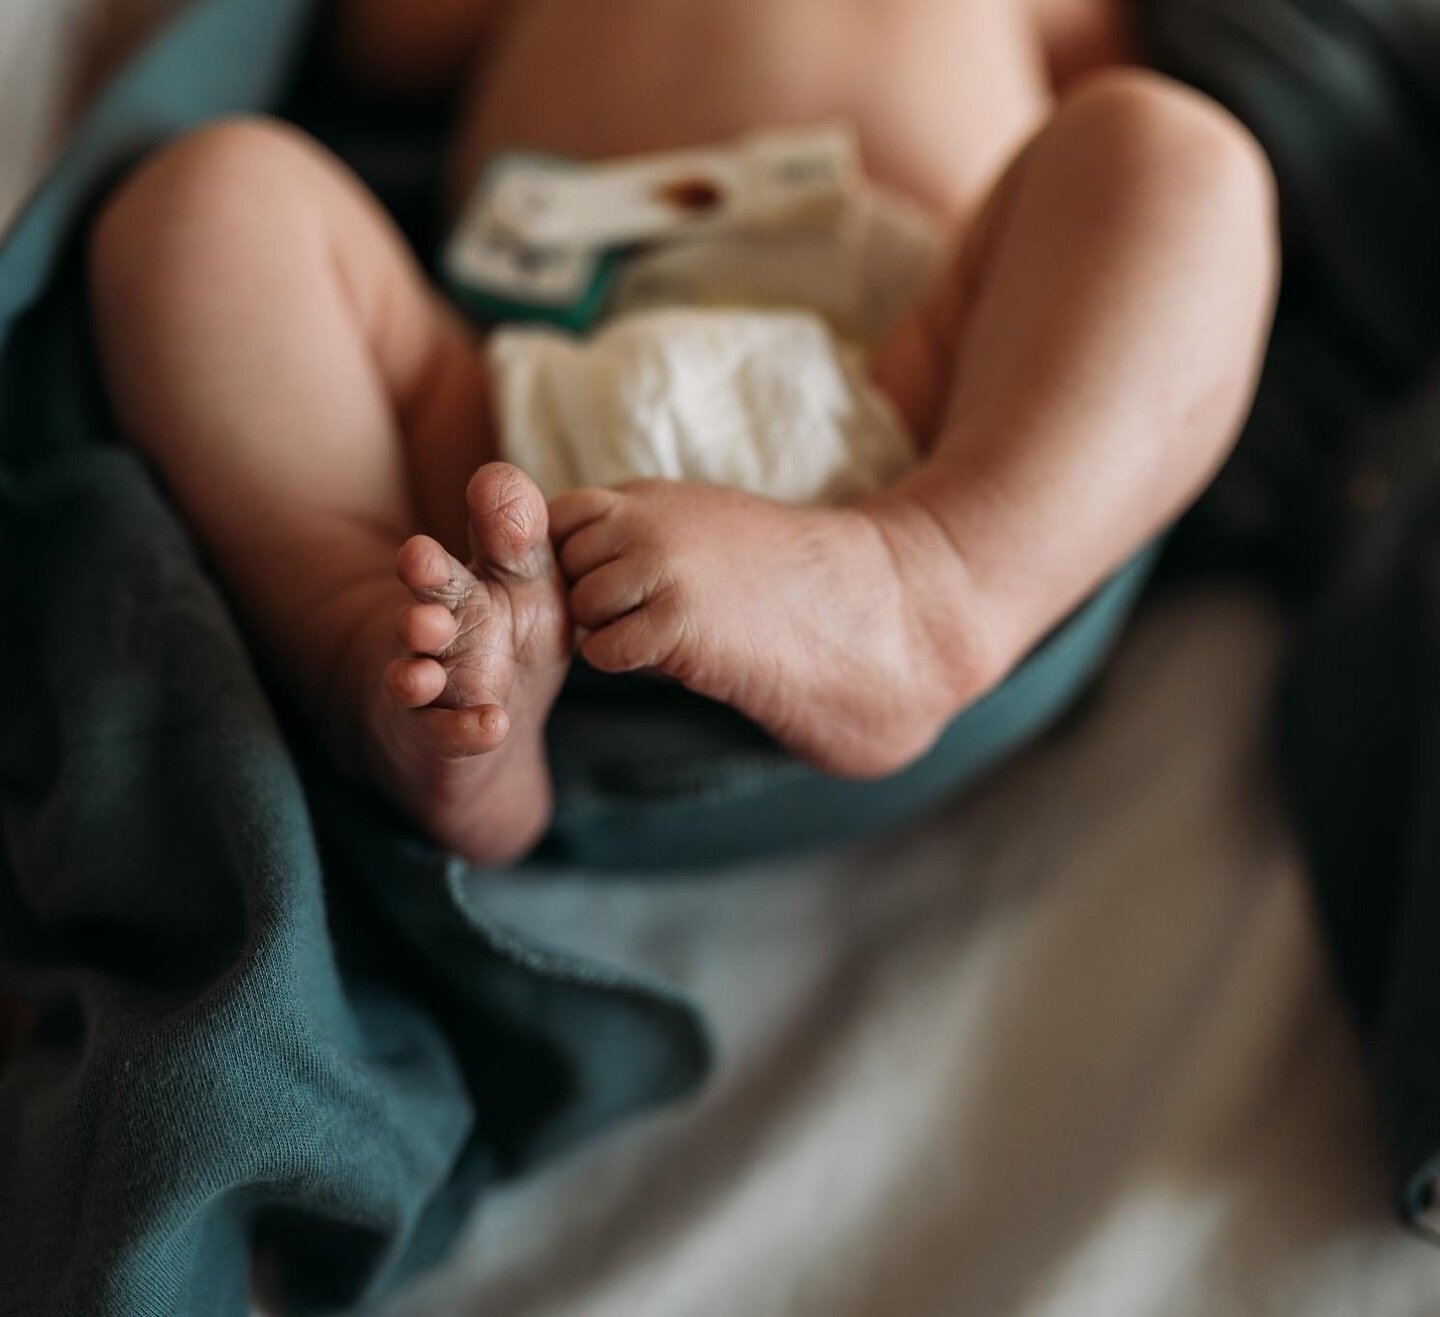 Fresh 48 sessions are so underrated.. The wrinkled feet always get me 🥹 

#fresh48photography #newbornphotography #lifestylephotography #614moms